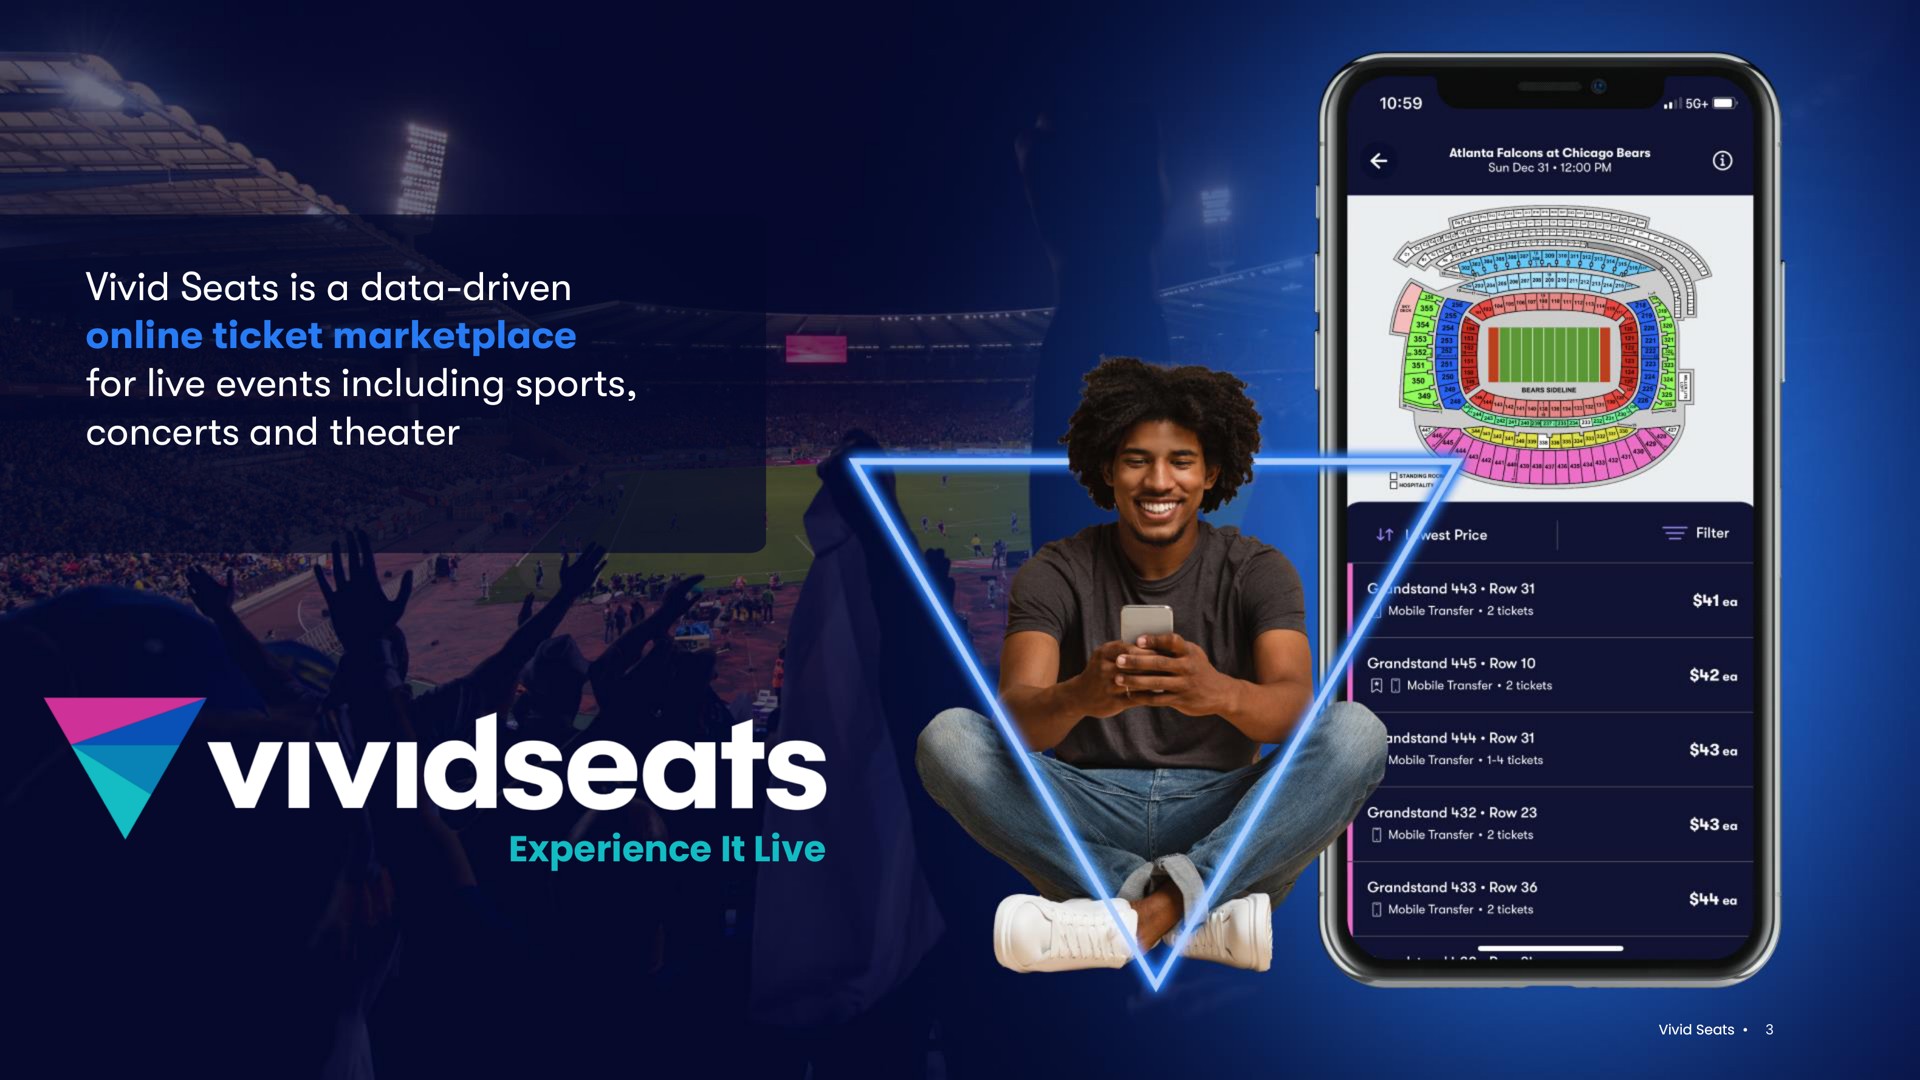 vivid seats is a data driven ticket for live events including sports concerts and theater experience it live | Vivid Seats